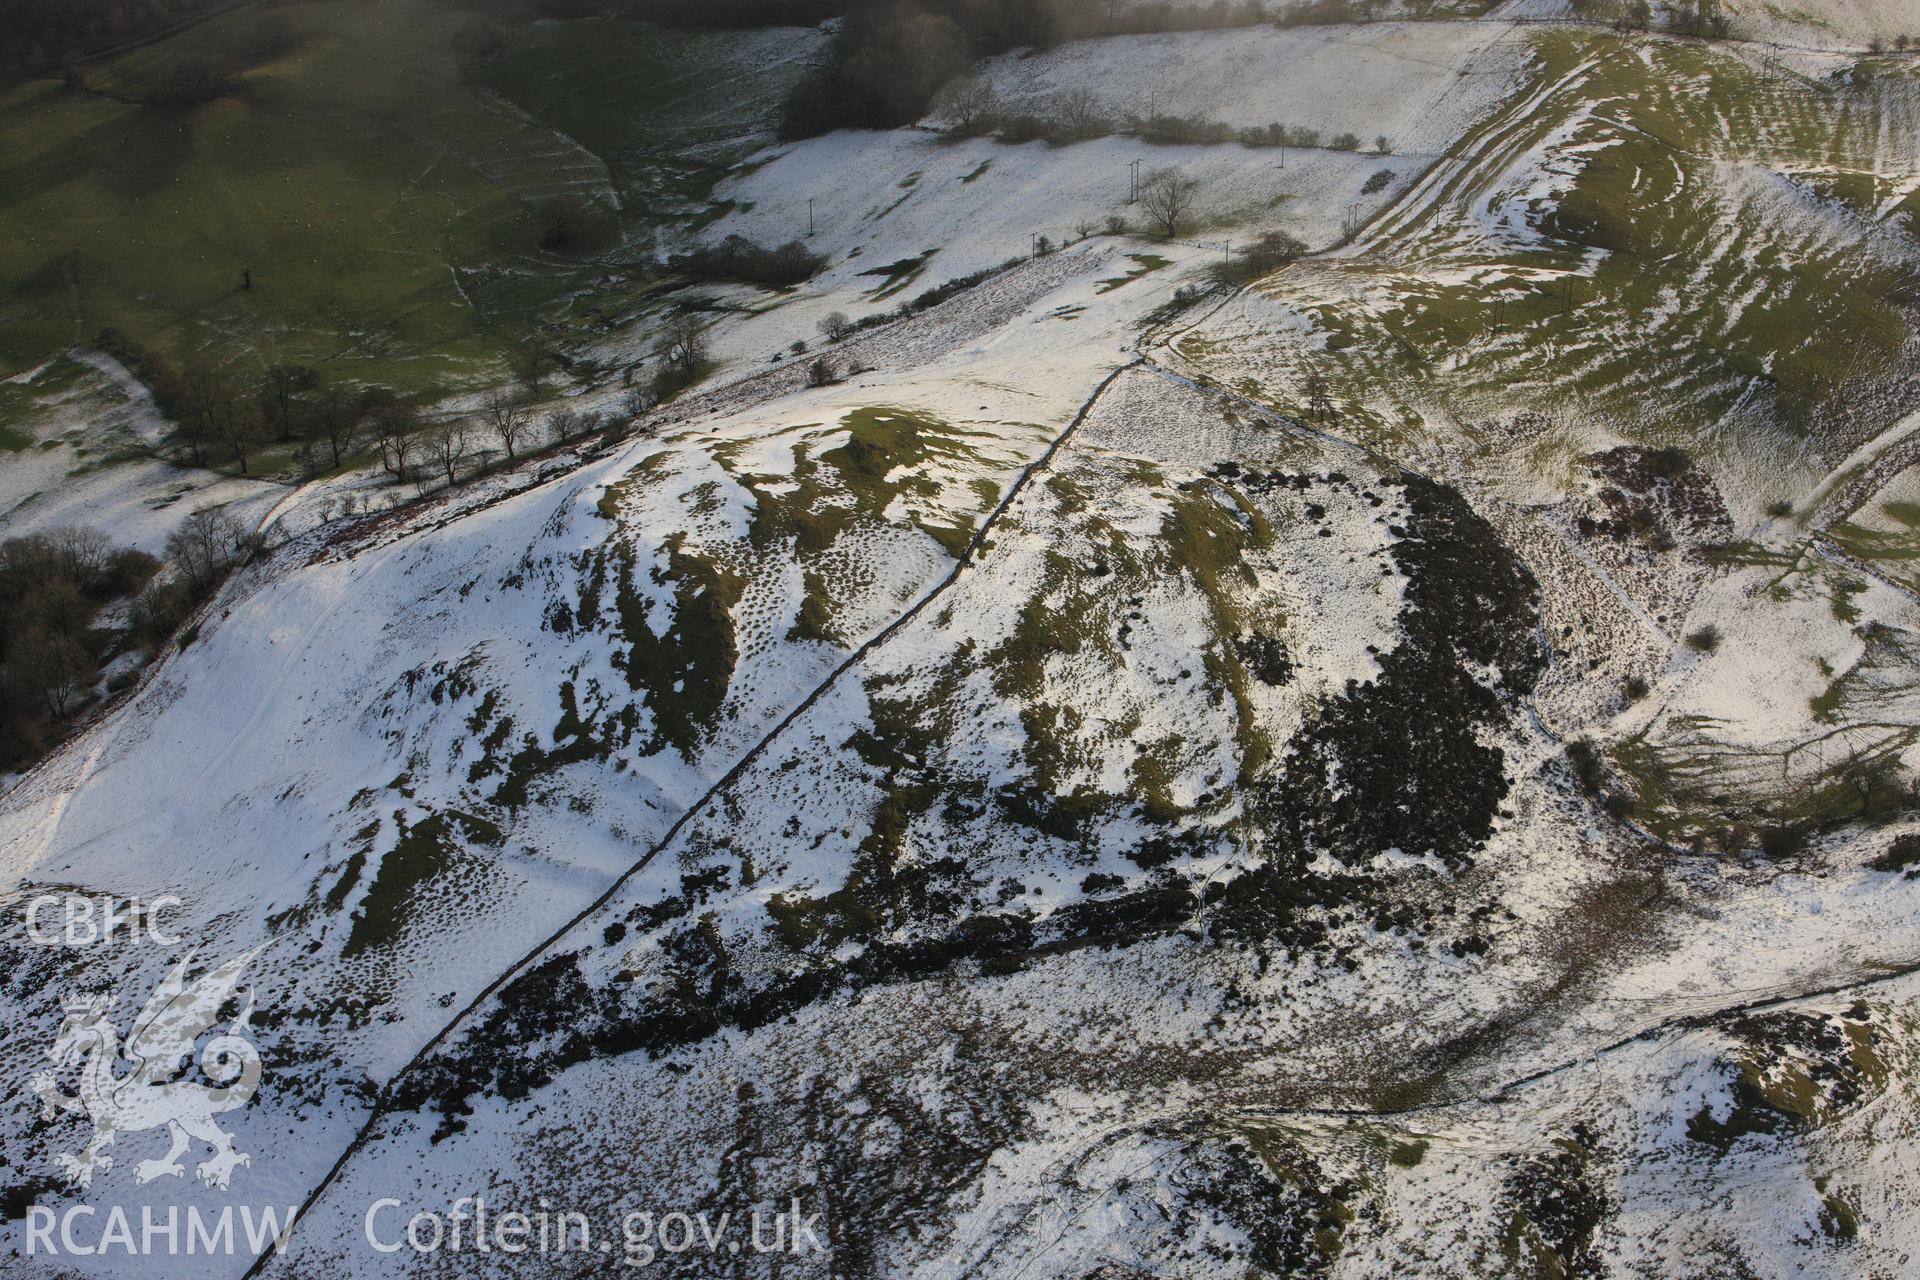 RCAHMW colour oblique photograph of Gaer Fawr hillfort, with melting snow. Taken by Toby Driver on 18/12/2011.